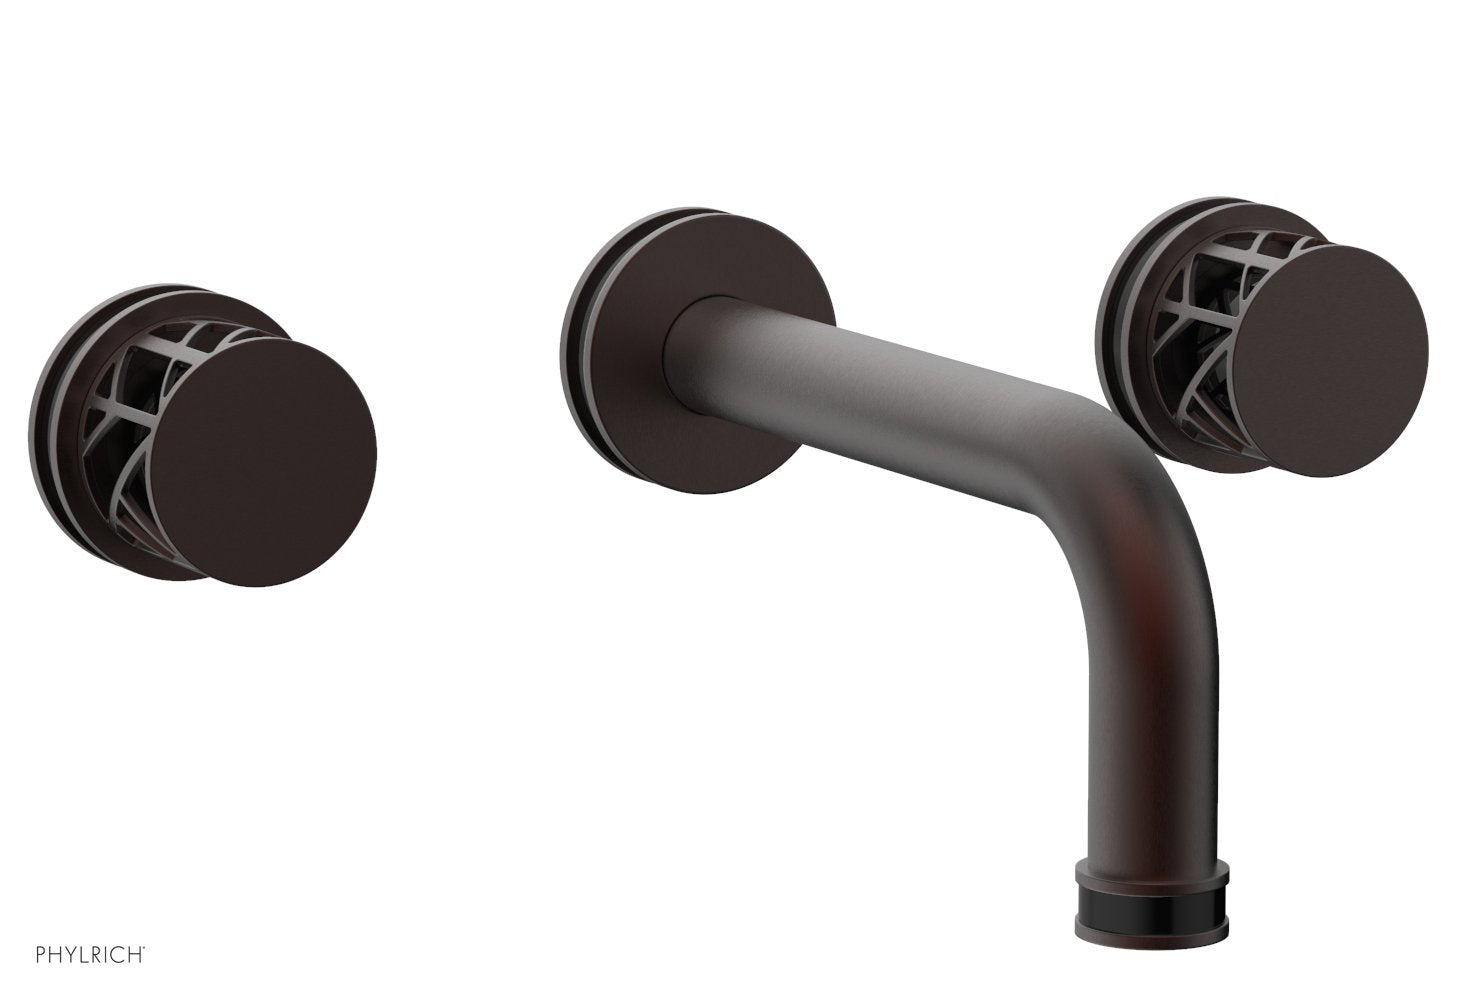 Phylrich JOLIE Wall Lavatory Set - Round Handles with "Black" Accents